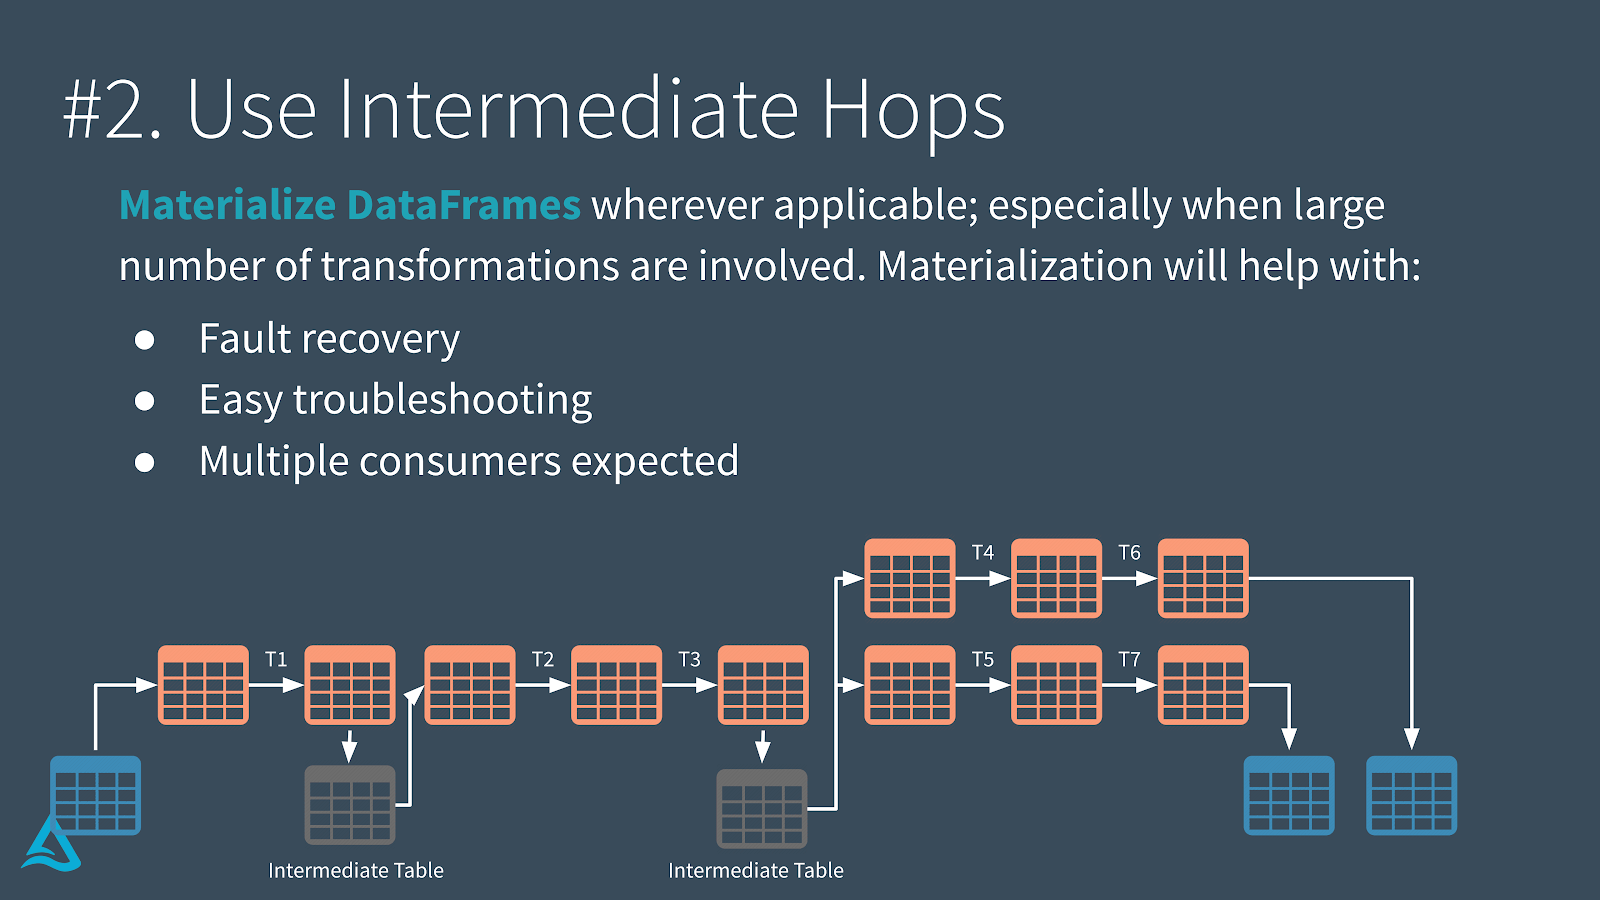 Benefits of using “Intermediate Hops” with Delta tables, especially where large numbers of transformations are involved.